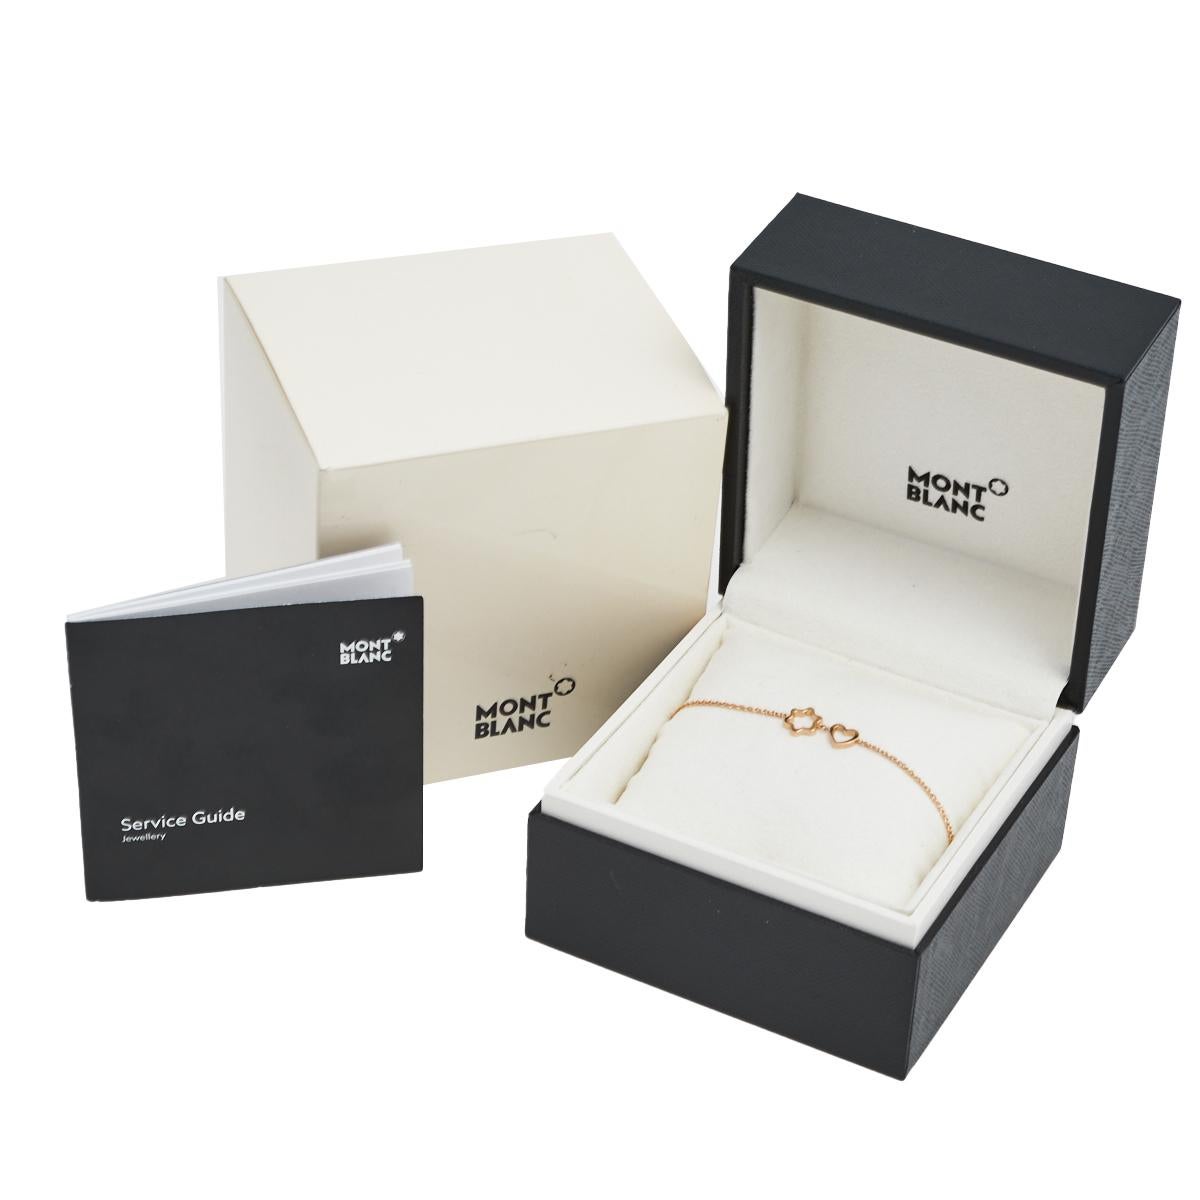 Montblanc brings you this lovely bracelet in 18k rose gold to adorn your wrist with beauty! The slender chain holds two charms, one in the shape of a heart and the other in the shape of the brand's star logo. The bracelet is complete with a lobster